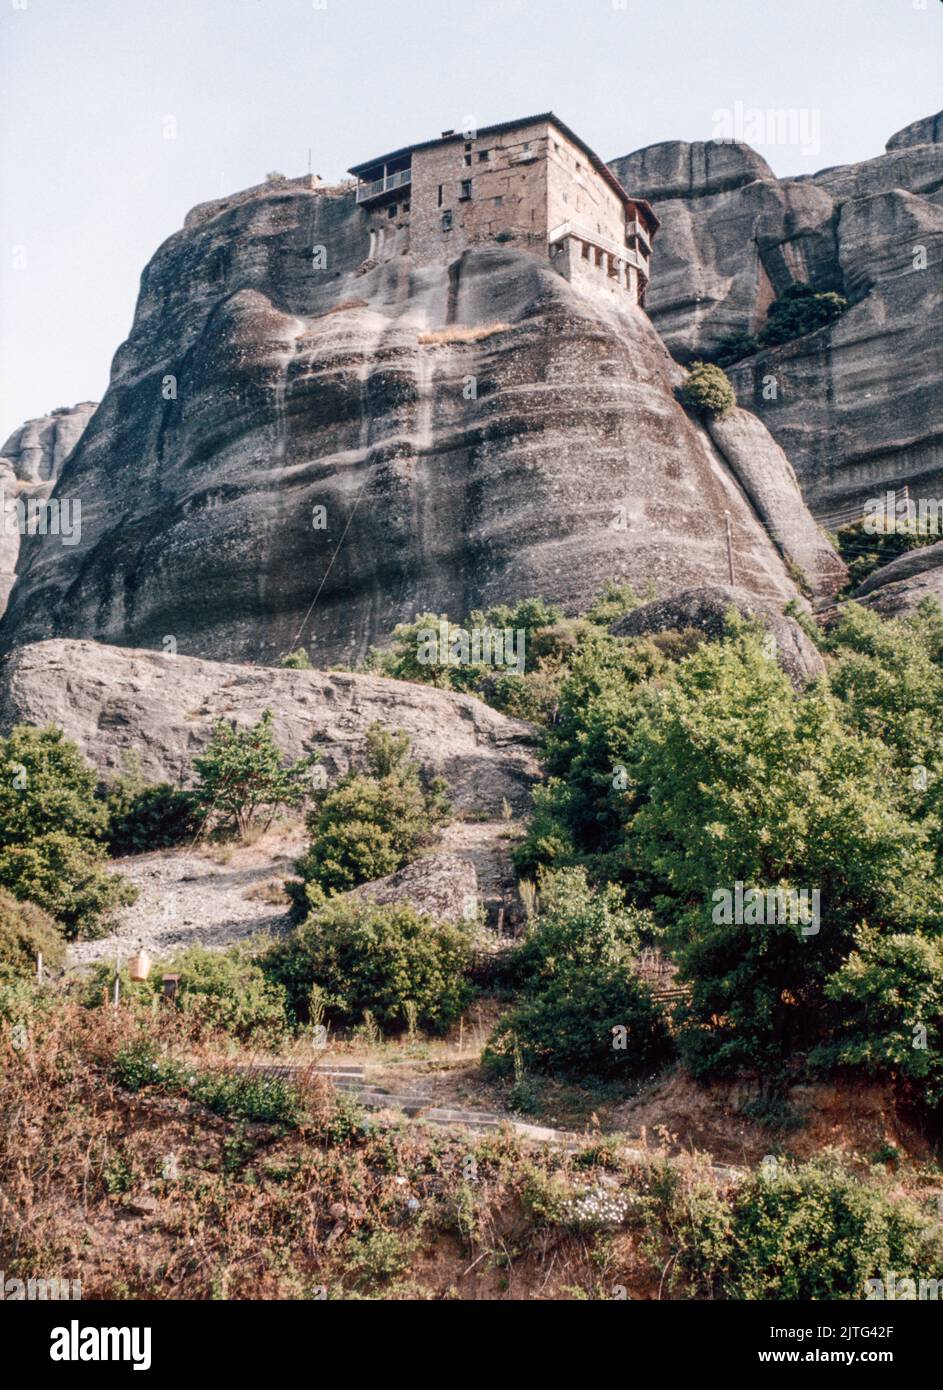 Monastery of St. Nicholas Anapausas at The Meteora - a rock formation in central Greece hosting one of the largest and most precipitously built complexes of Eastern Orthodox monasteries. March 1980. Archival scan from a slide. Stock Photo